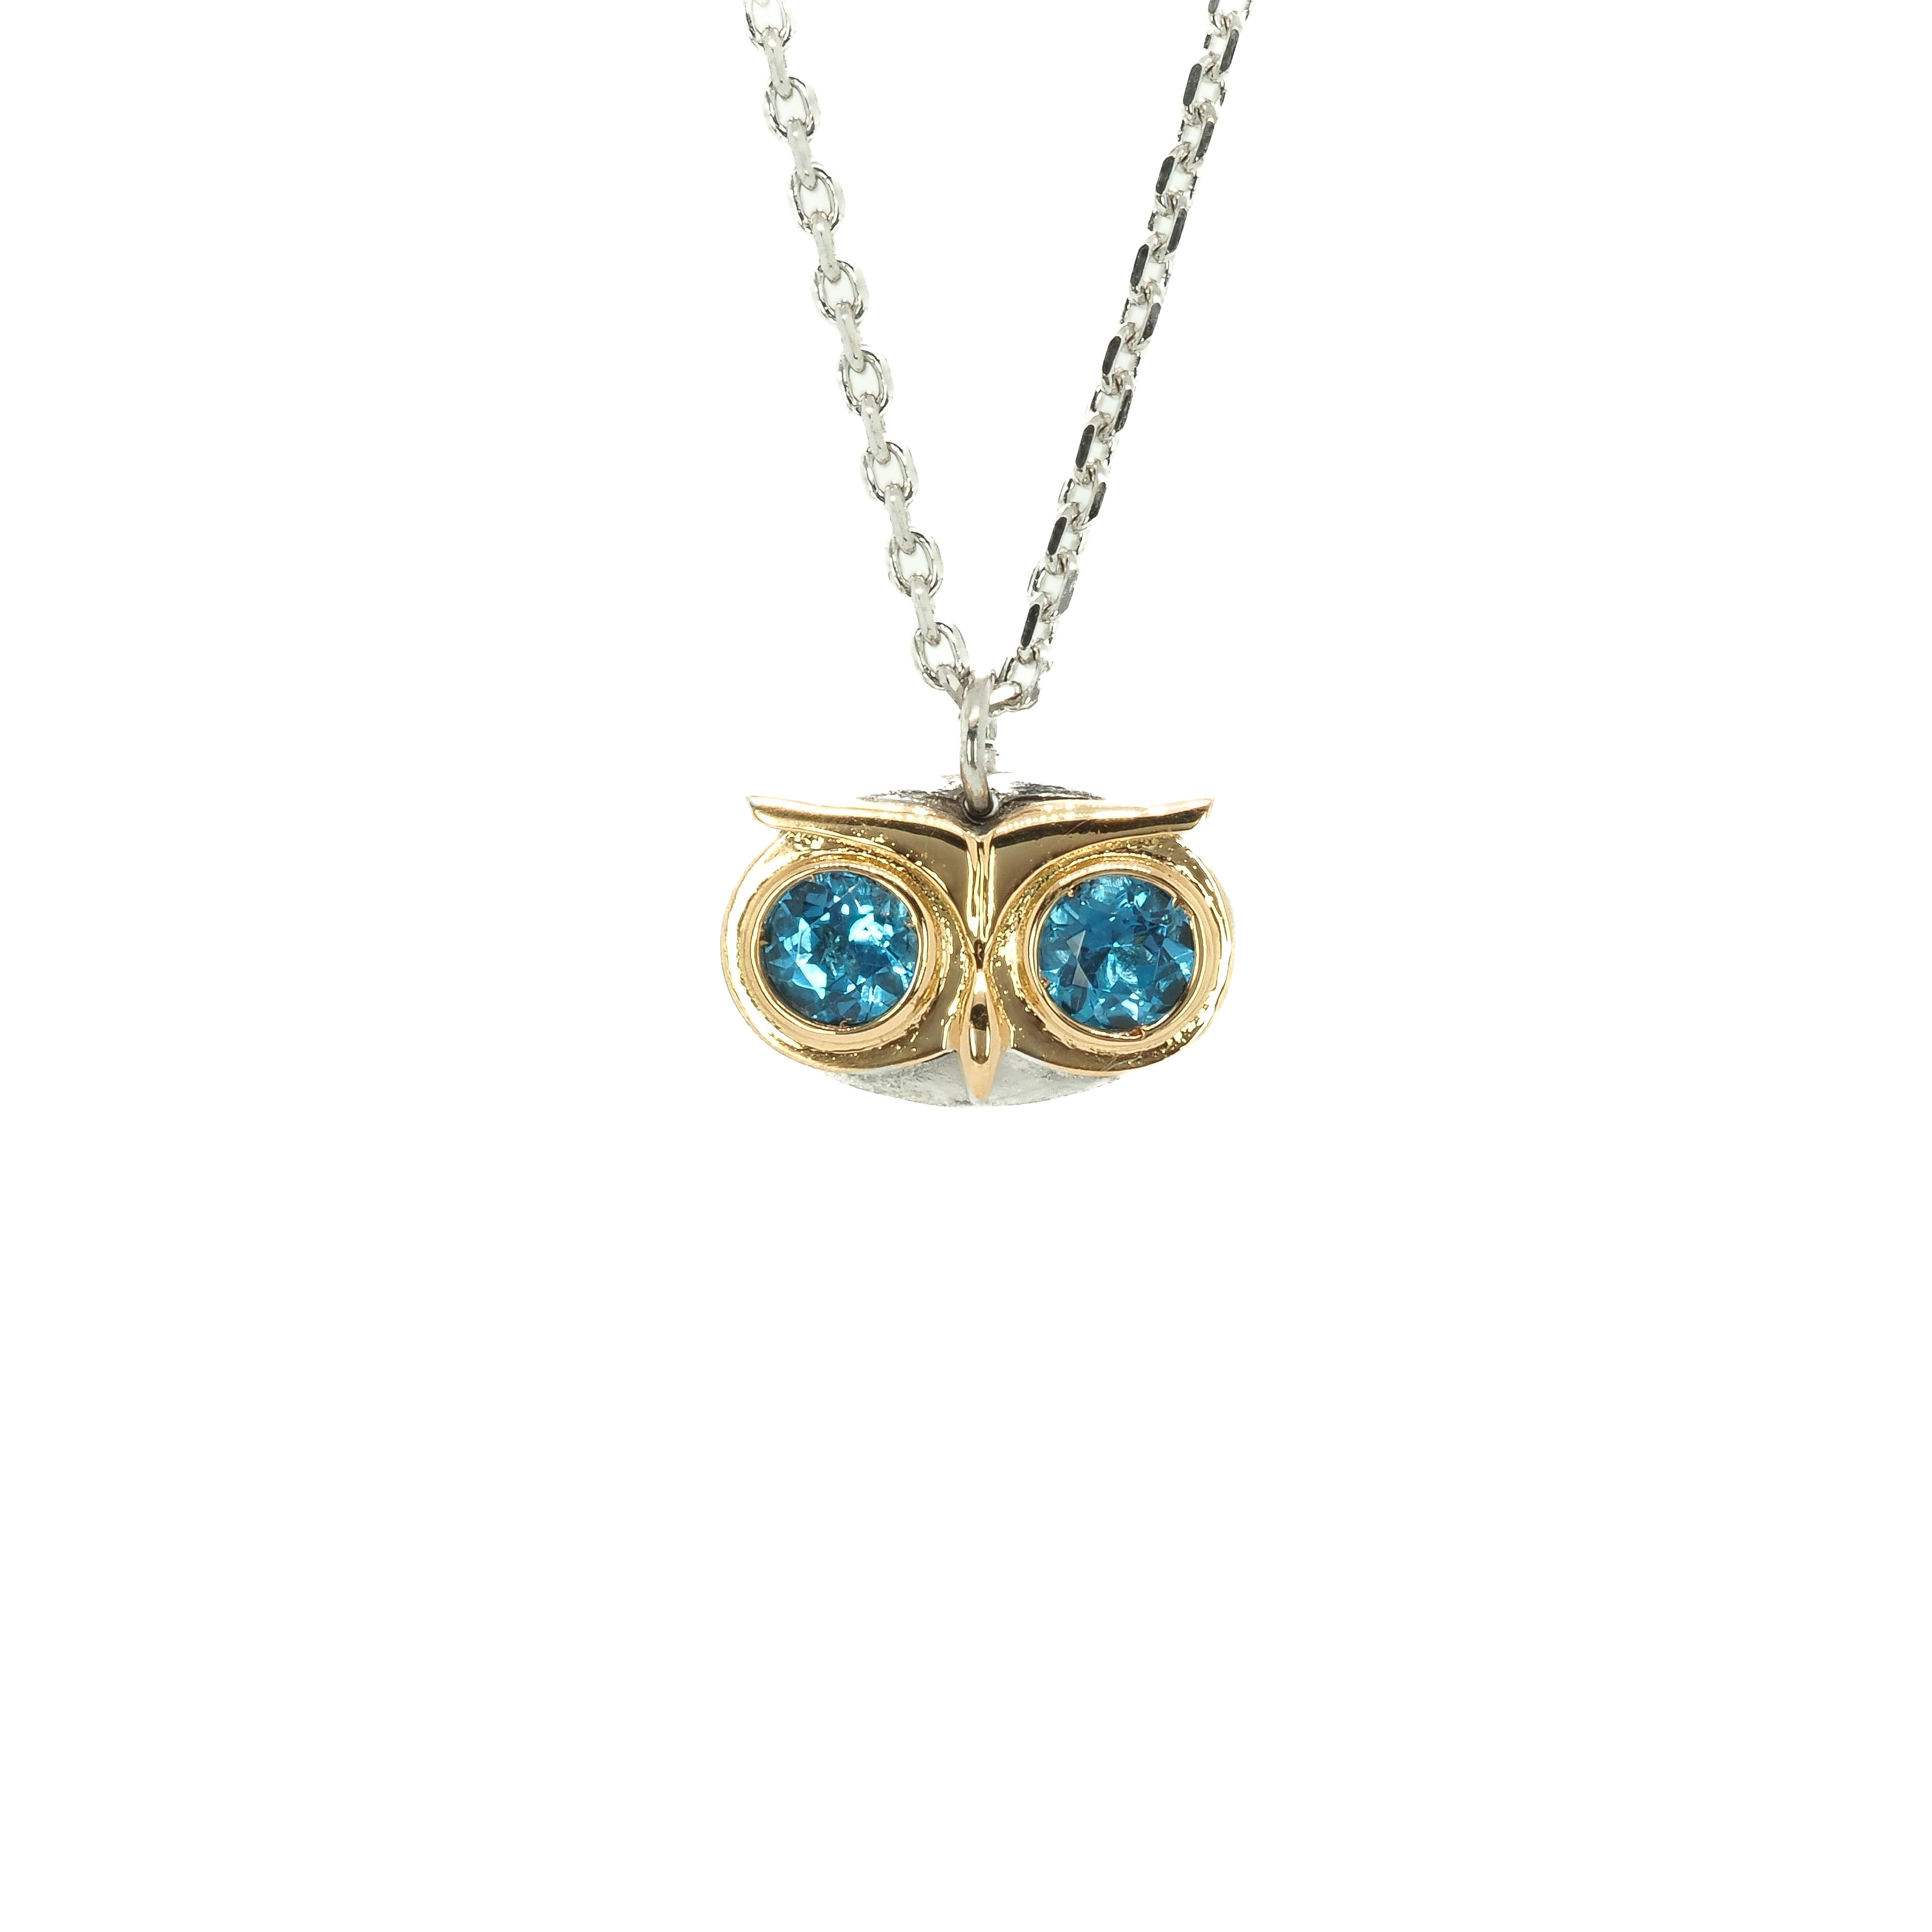 Taru Jewelry captivating owl necklace, crafted from 18K gold and sterling silver, captures the essence of the wise and mysterious bird. The owl's eyes are set with sparkling blue topaz, adding a touch of color and elegance to the piece. The blue topaz represents loyalty, righteousness, and the ability to improve communication and find the perfect pathways to success.